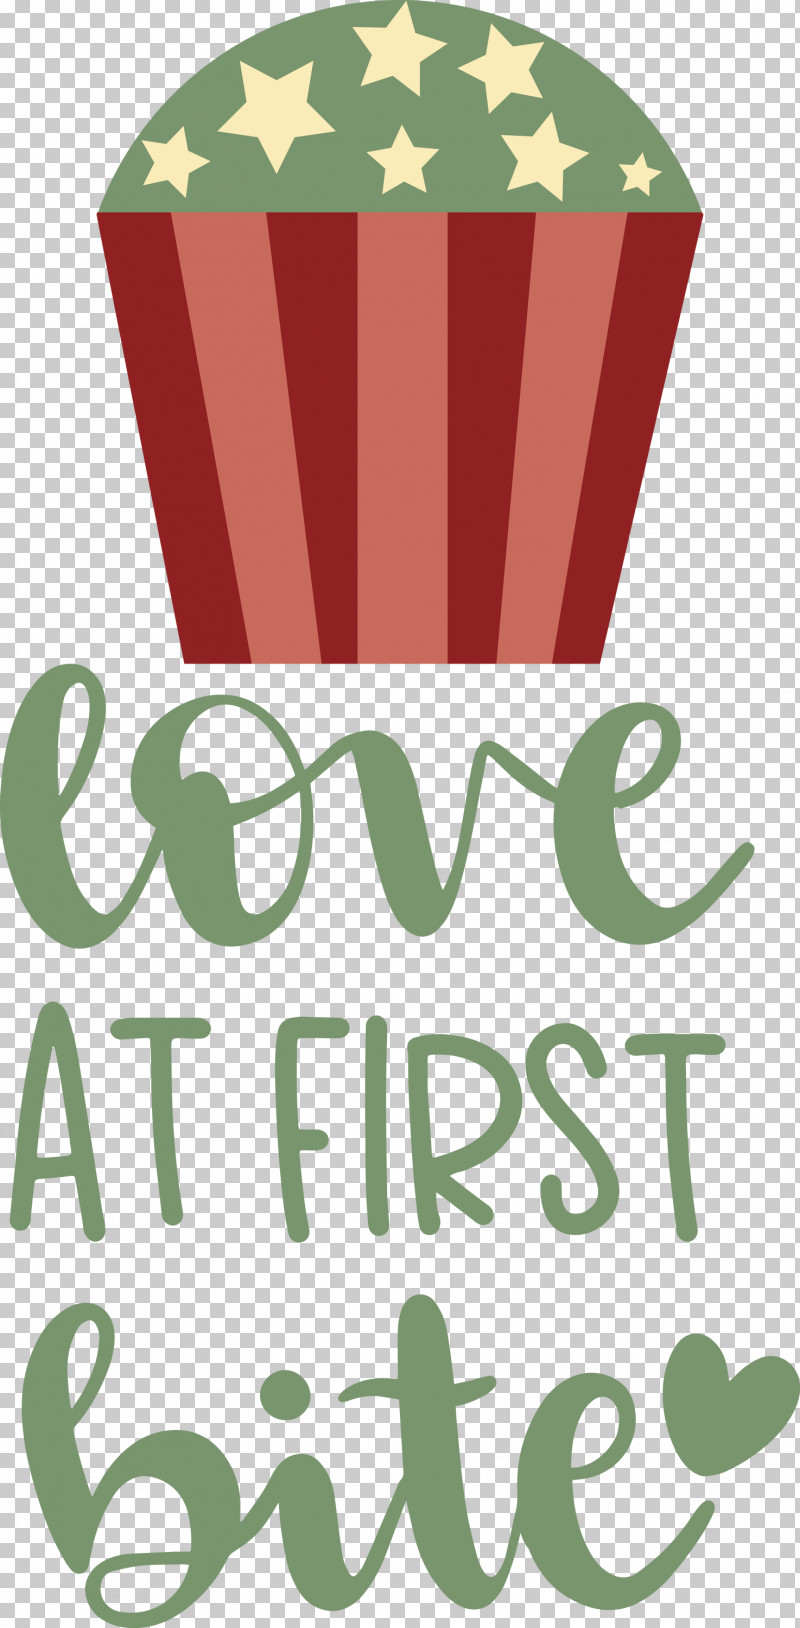 Love At First Bite Cooking Kitchen PNG, Clipart, Cooking, Cupcake, Food, Geometry, Green Free PNG Download